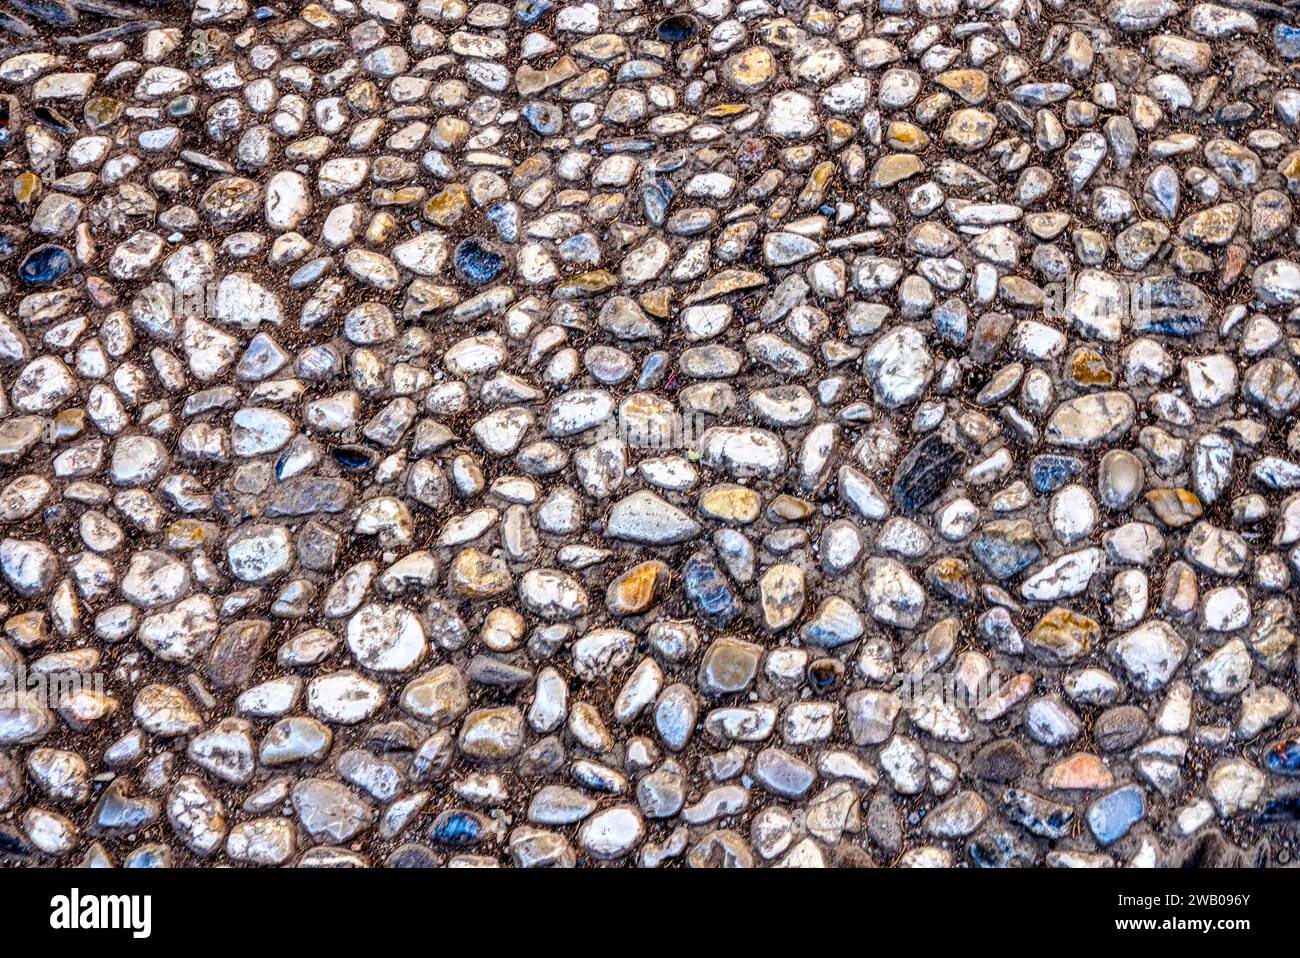 Weathered old cobble stone background of pebbles and stones Stock Photo